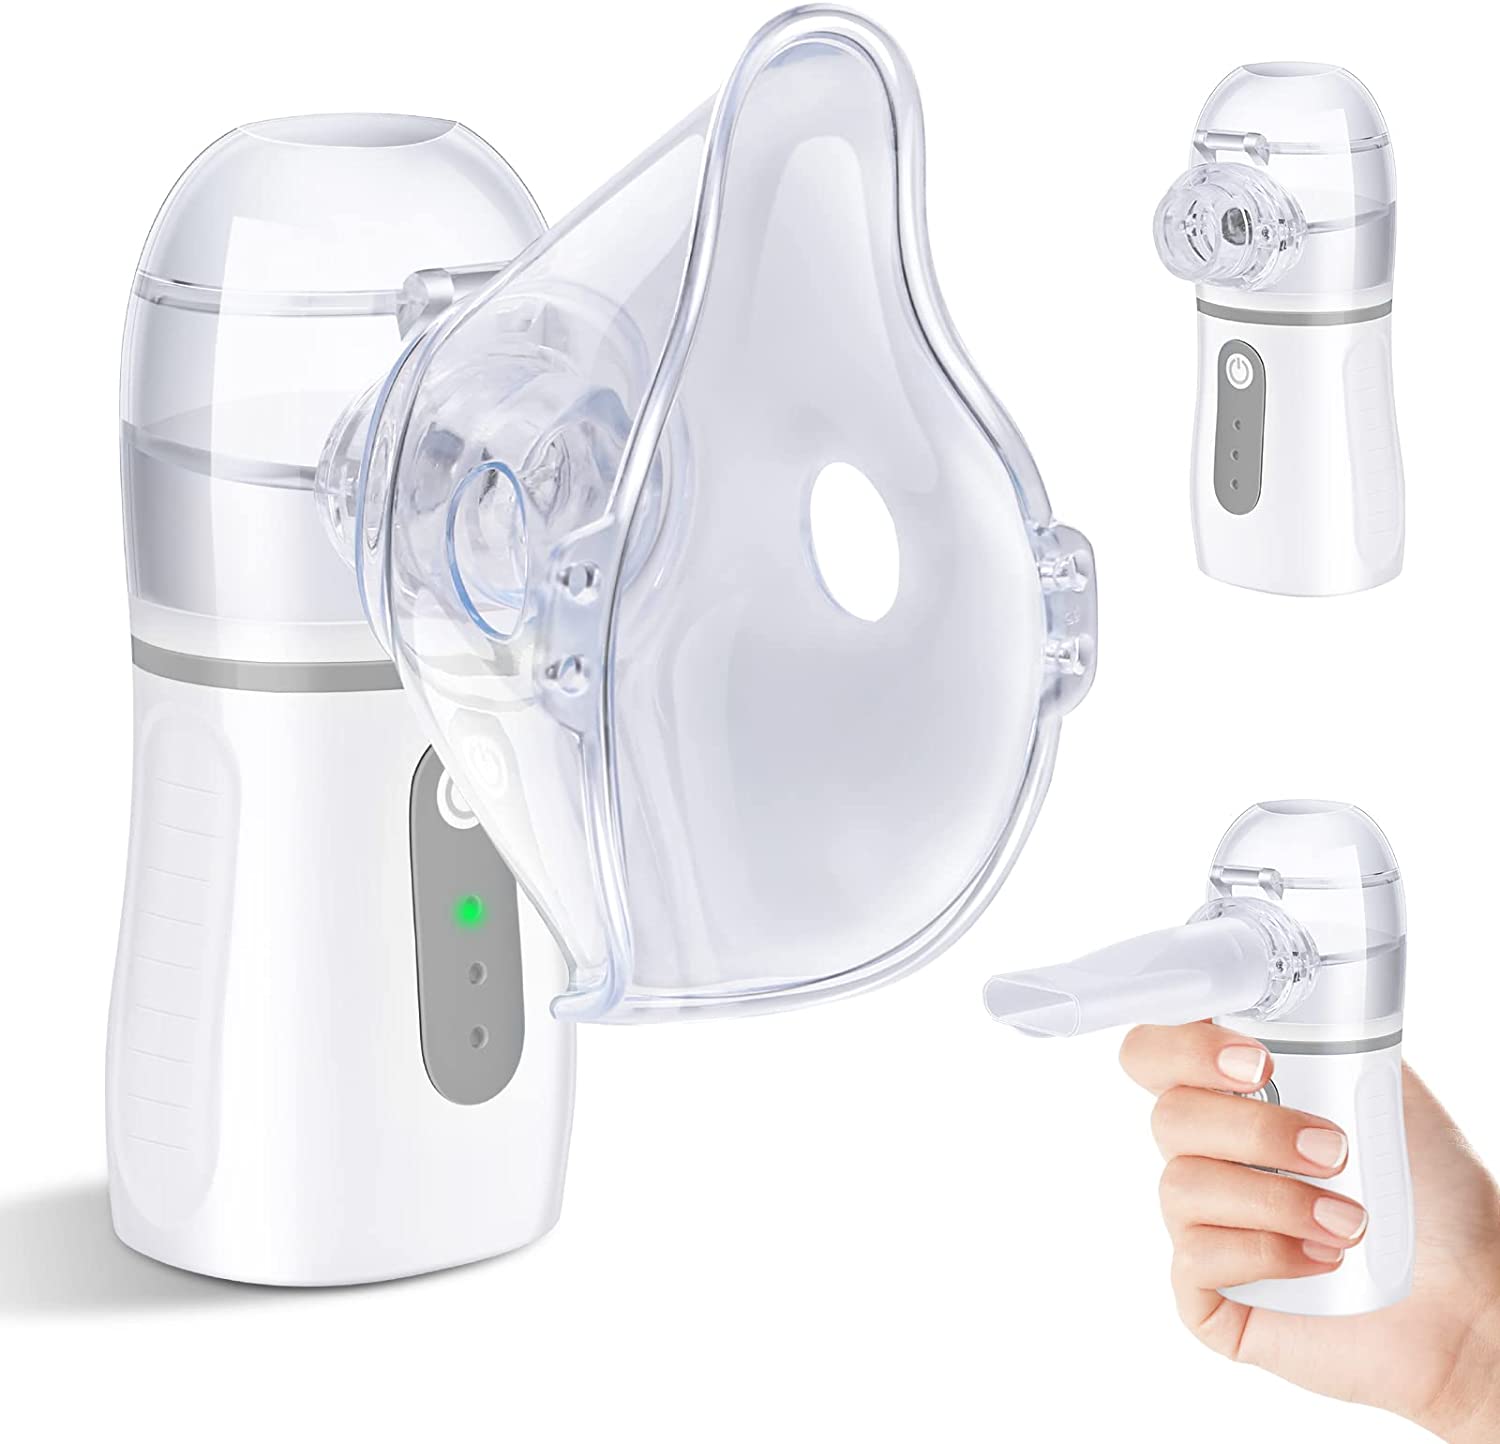 Portable Nebulizer, Nebulizer Machine for Adults and Kids,Used at Home, Office, Travel